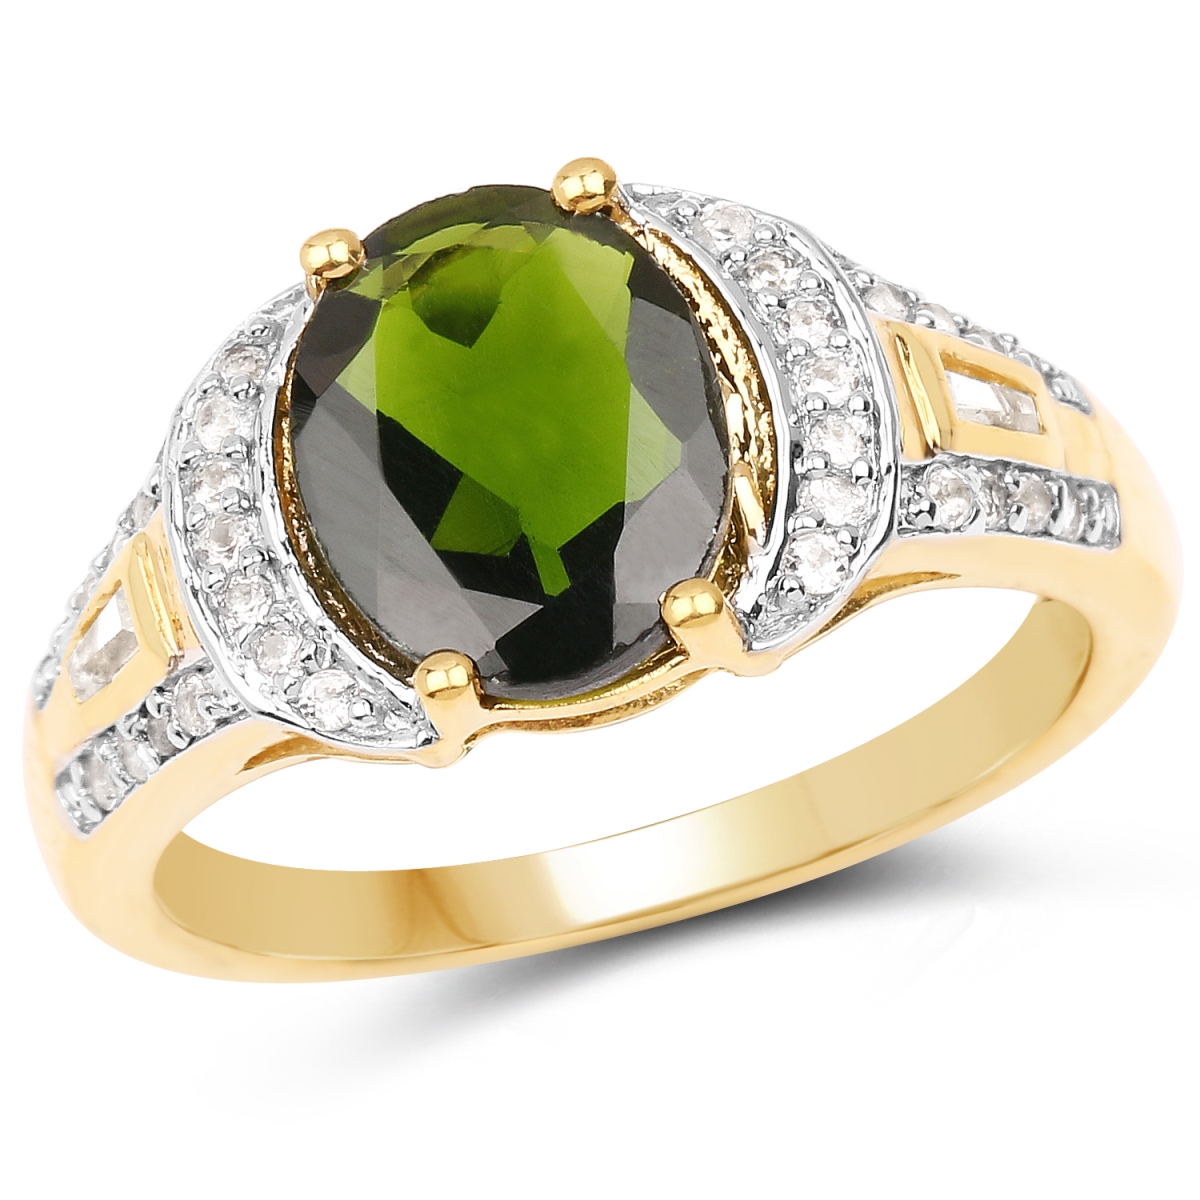 Picture of Malaika QR9899CDWT-SS18KY-7 18K Yellow Gold Plated 2.79 Carat Genuine Chrome Diopside & White Topaz 0.925 Sterling Silver Ring